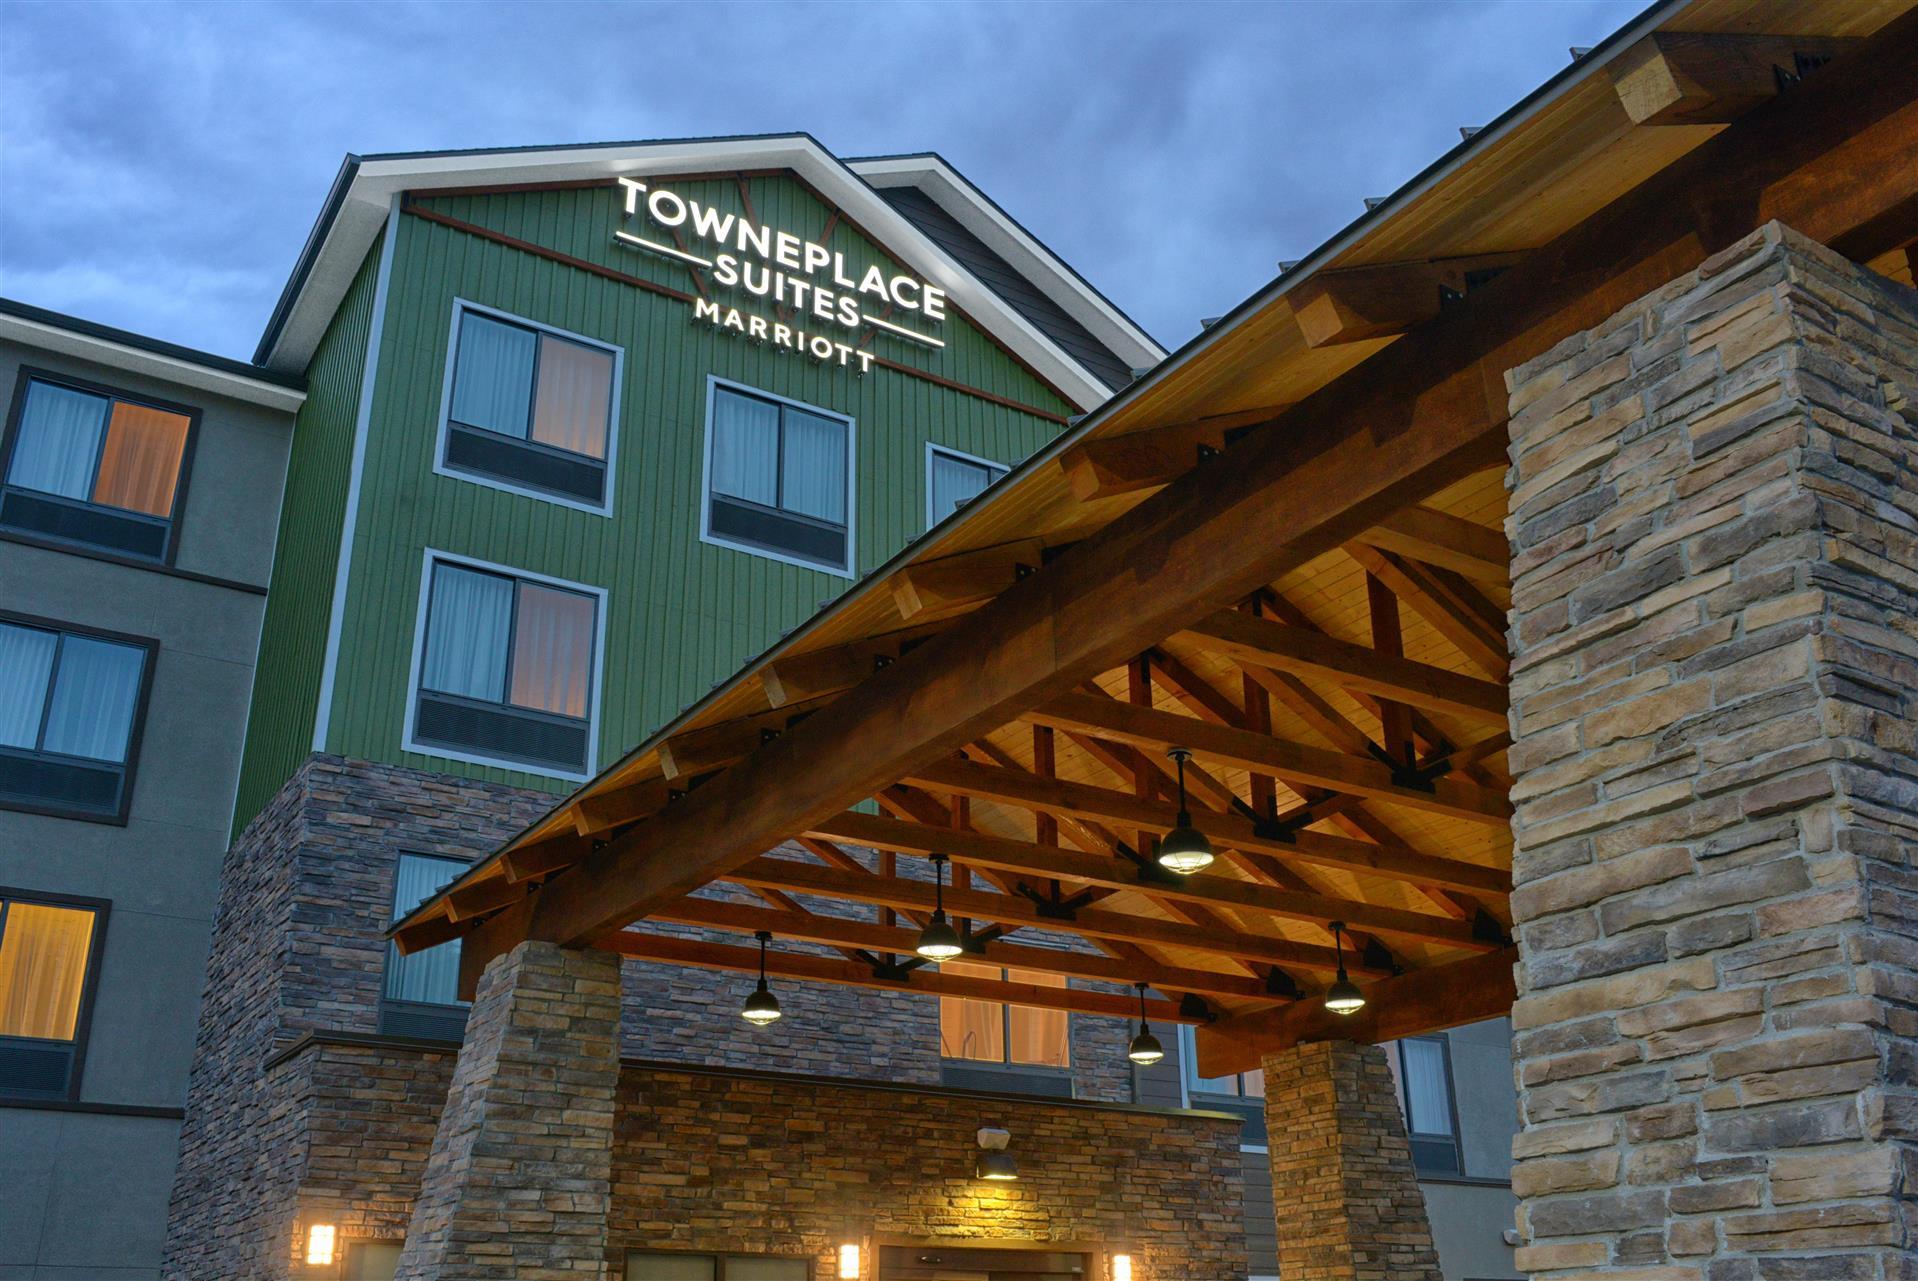 TownePlace Suites Denver South/Lone Tree in Lone Tree, CO